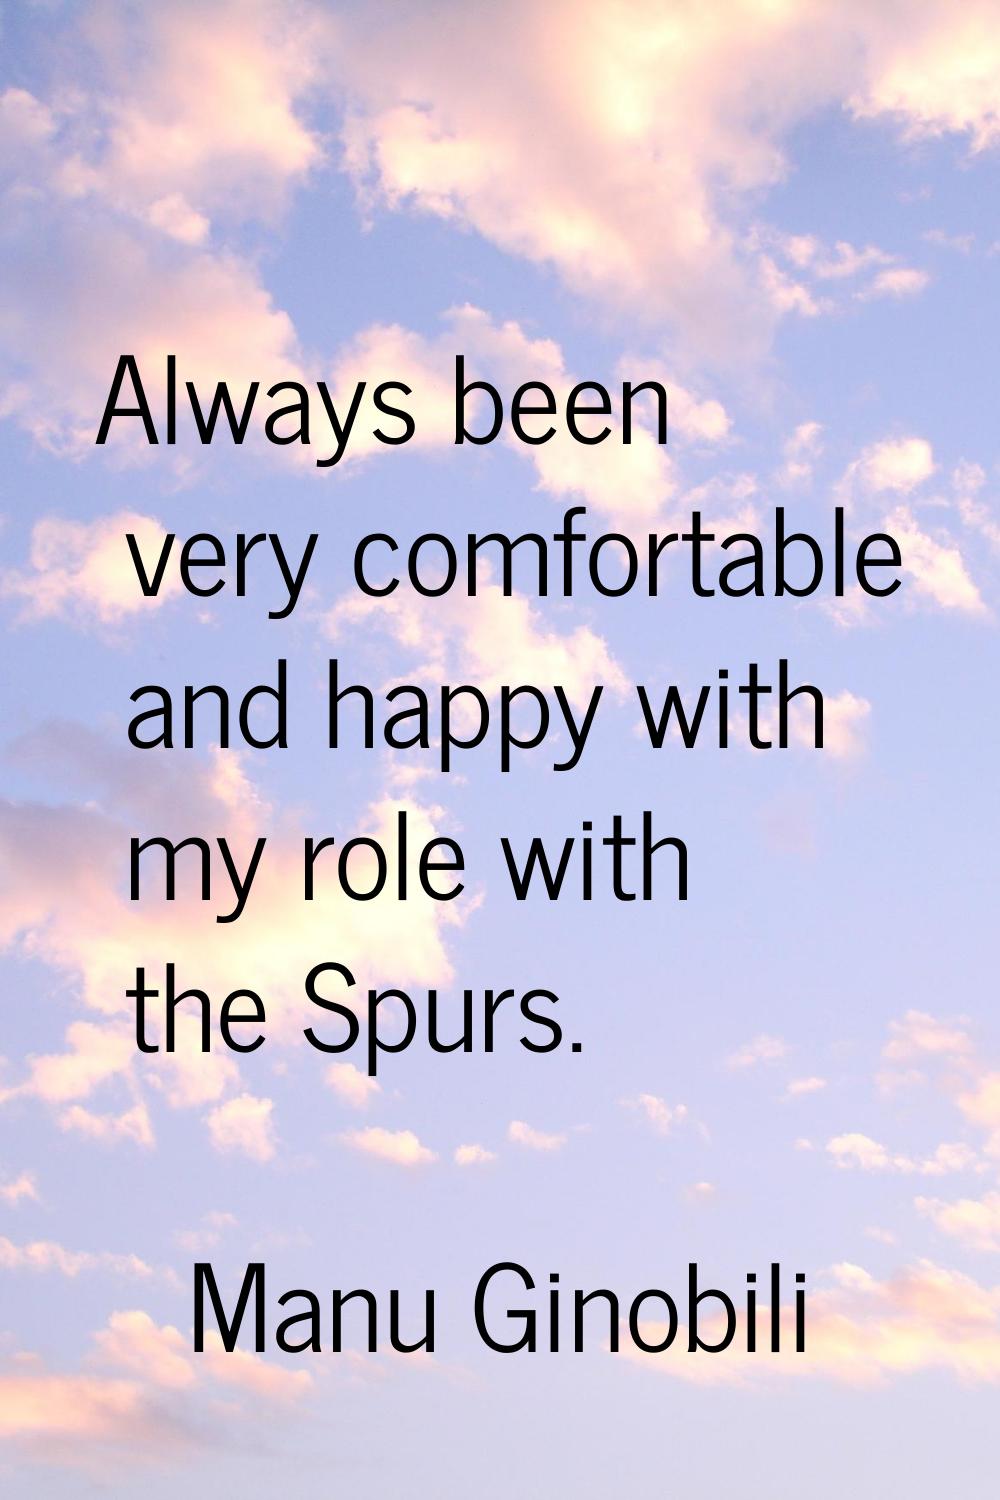 Always been very comfortable and happy with my role with the Spurs.